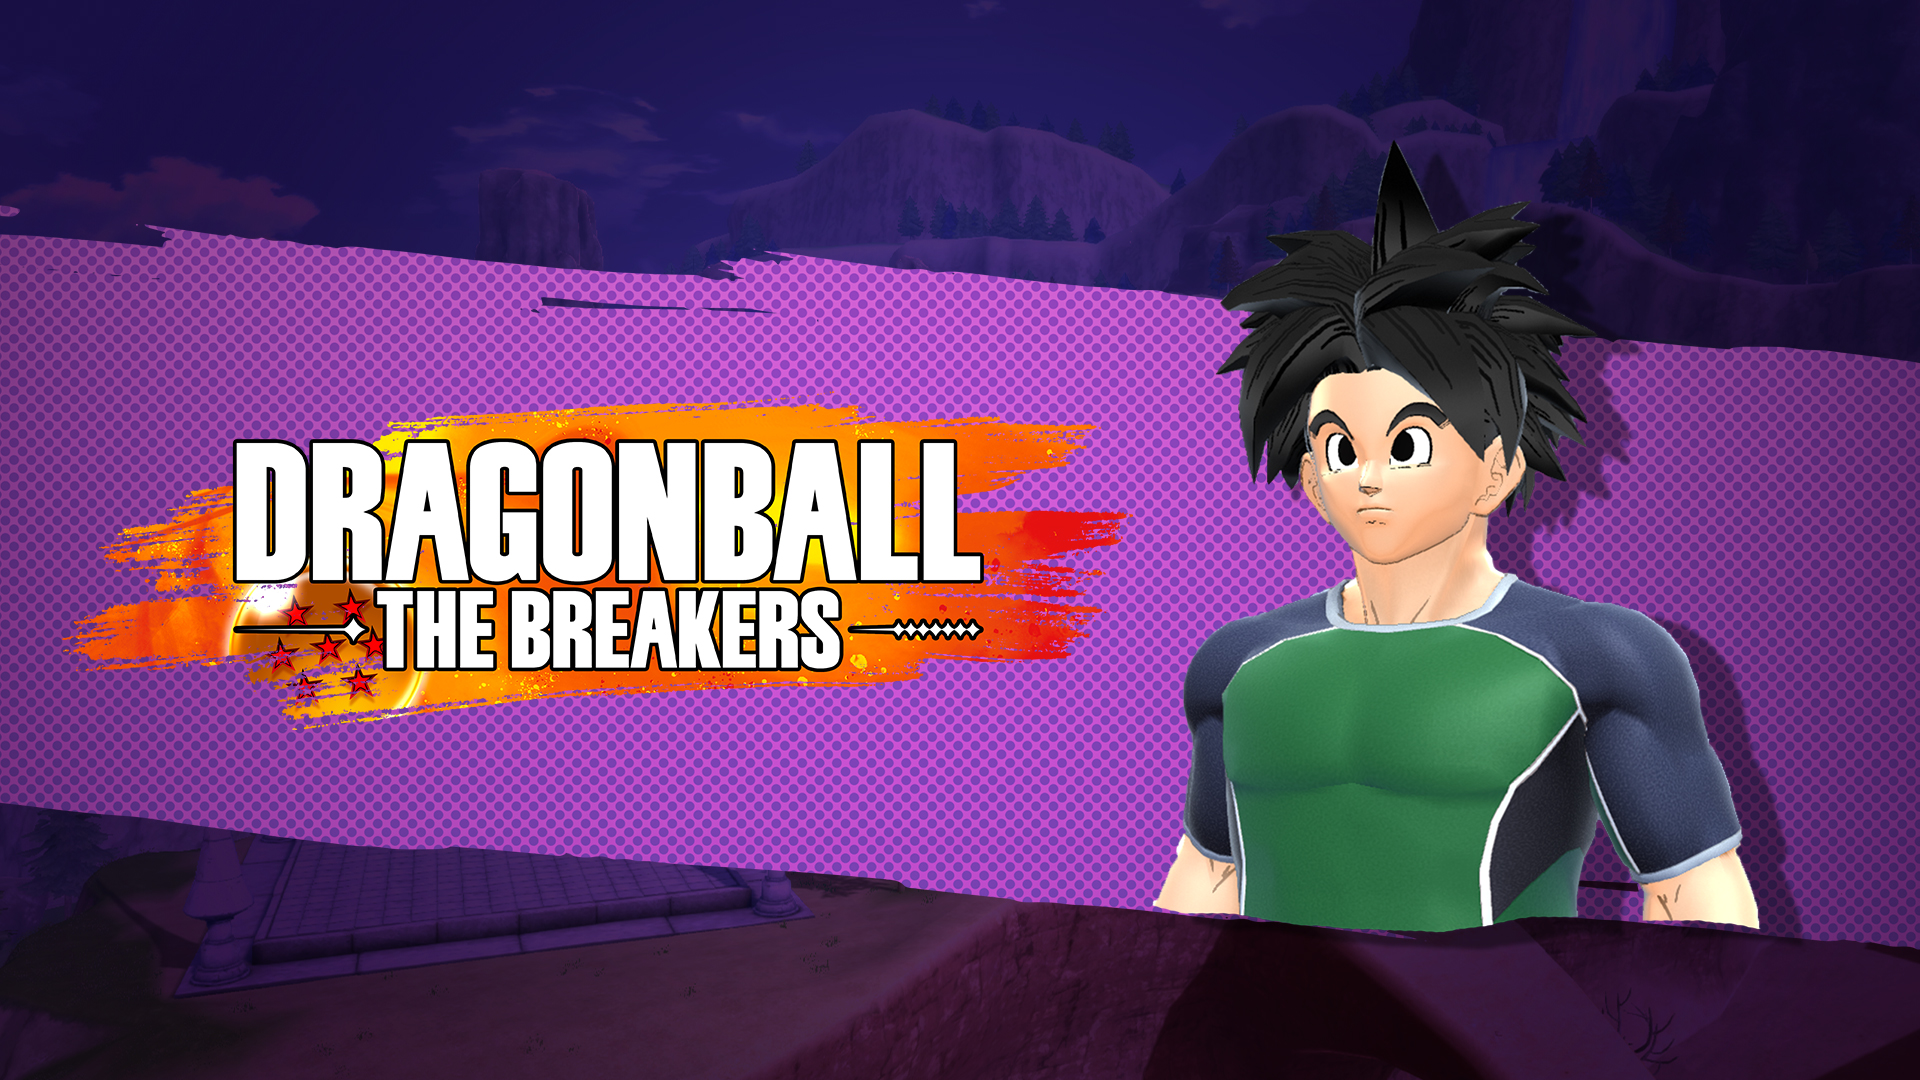 DRAGON BALL: THE BREAKERS - Base Layer (Green)